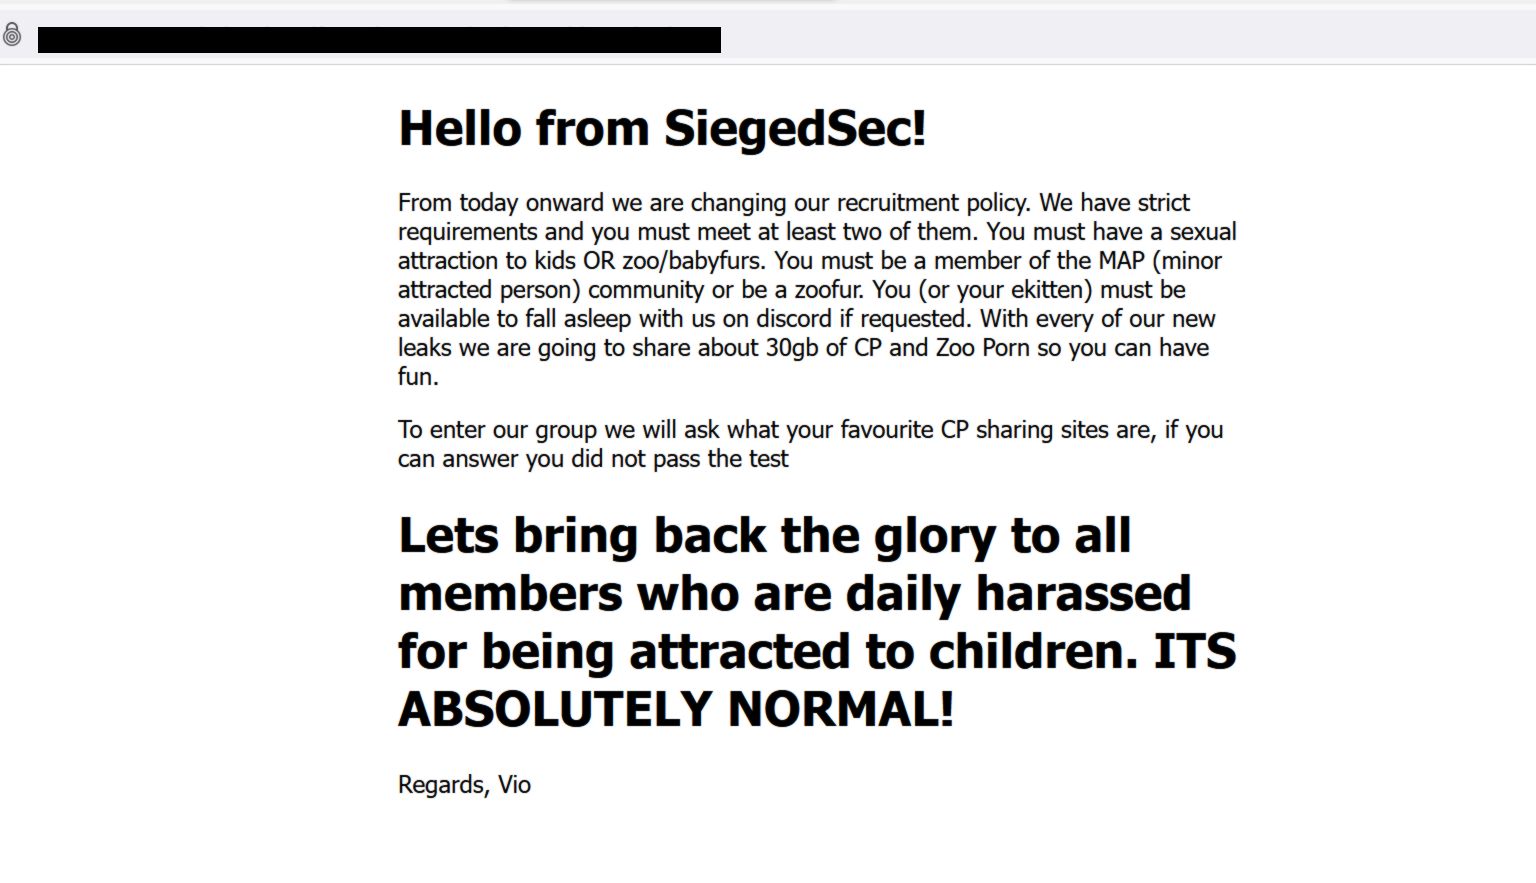 [CONTENT WARNING: References to zoophilia and child pornography]Hello from SiegedSec! From today onward we are changing our recruitment policy. We have strict requirements and you must meet at least two of them. You must have a sexual attraction to kids OR zoo/babyfurs. You must be a member of the MAP (minor attracted person) community or be a zoofur. You (or your ekitten) must be available to fall asleep with us on discord if requested. With every of our new leaks we are going to share about 30gb of CP and Zoo Porn so you can have fun. To enter our group we will ask what your favourite CP sharing sites are, if you can answer you did not pass the test Lets bring back the glory to all members who are daily harassed for being attracted to children. ITS ABSOLUTELY NORMAL! Regards, Vio